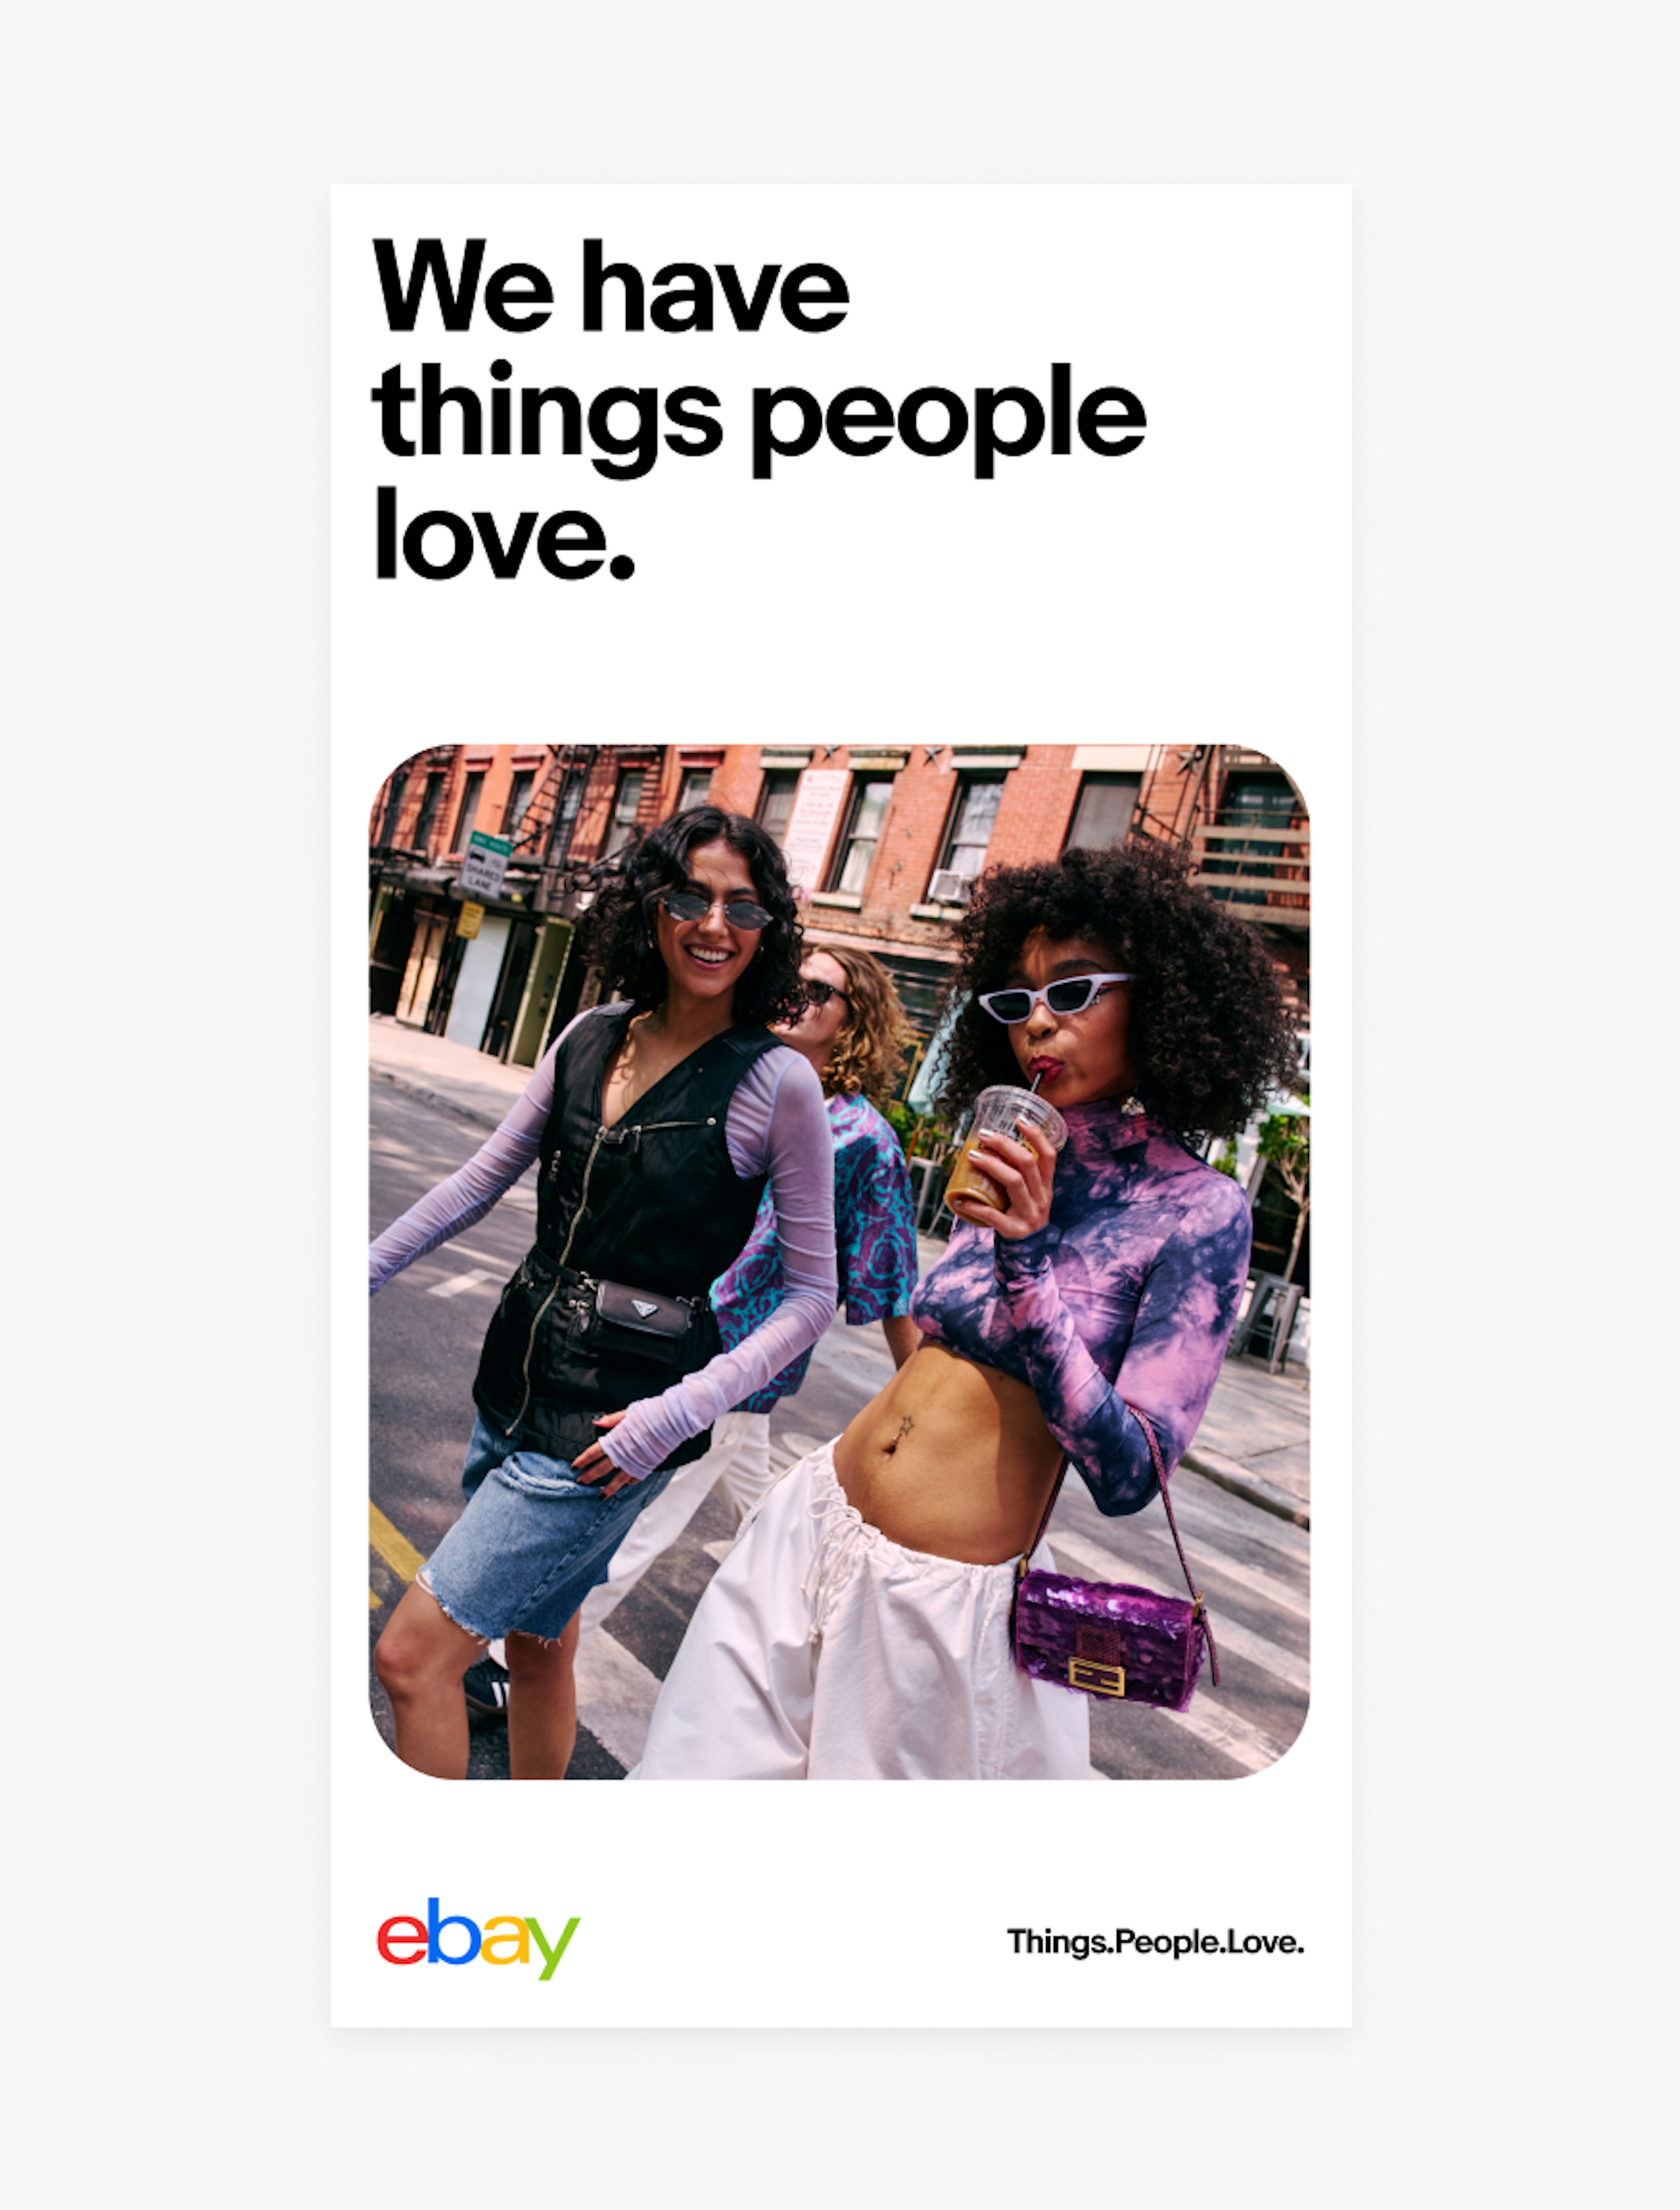 A vertical eBay ad with a white background. The title “We have things people love.” is in the upper left. The eBay logo is in the bottom left and tagline “Things.People.Love.” bottom right. A large image of two girls in colorful clothes fills the center.